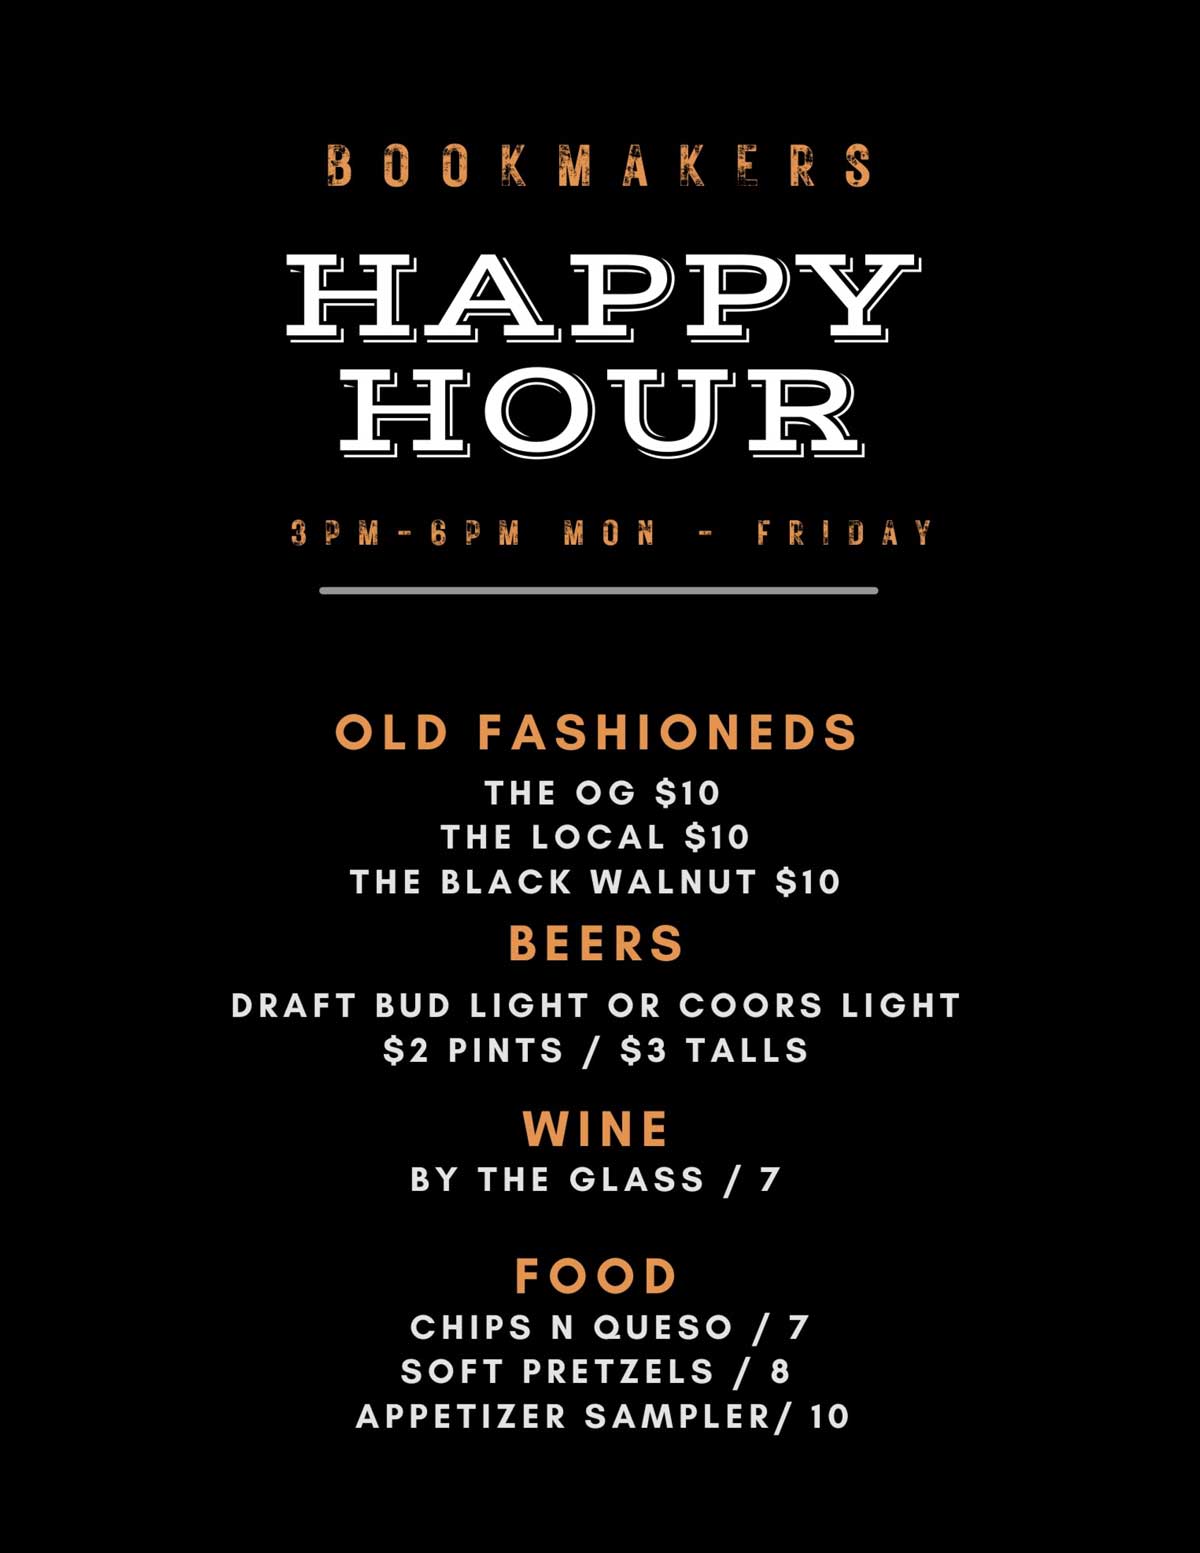 Bookmakers Bar and Grill happy hour specials, old fashioneds, beers and wine.